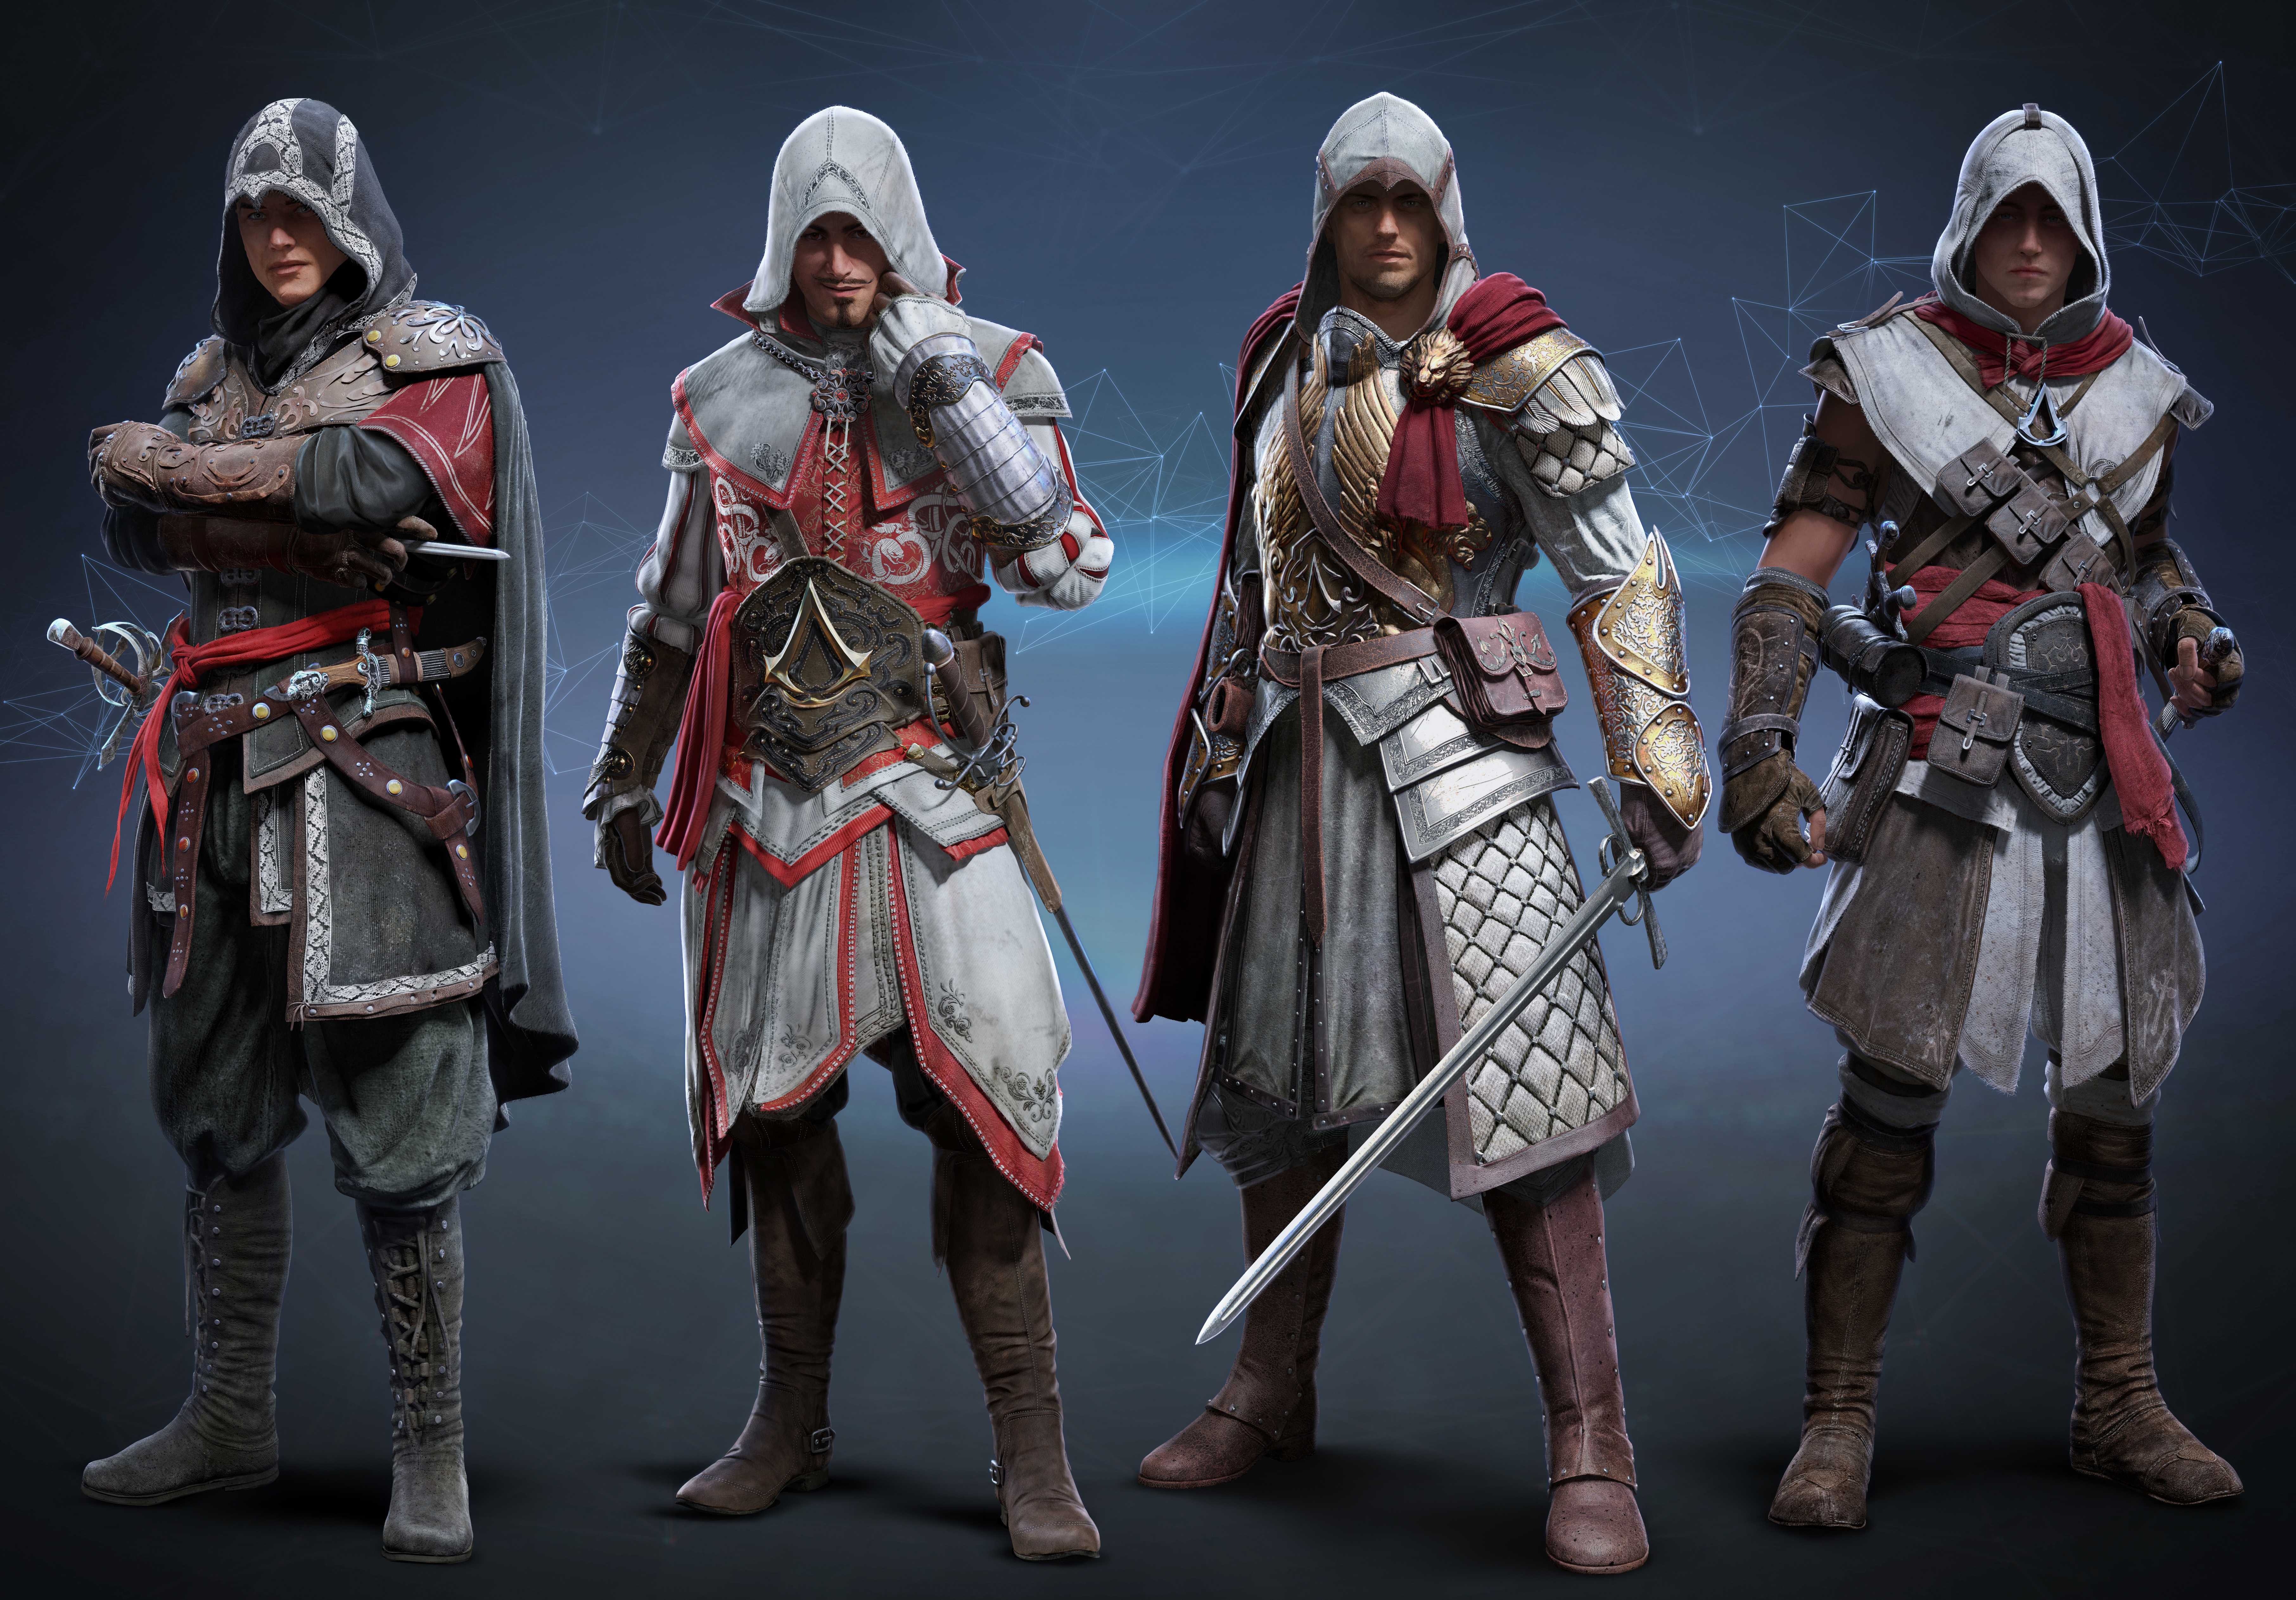 Assassin's wiki. Assassin s Creed. Ассасин Крид Аквилус. Assassin's Creed ассасины. Ассасин скри.